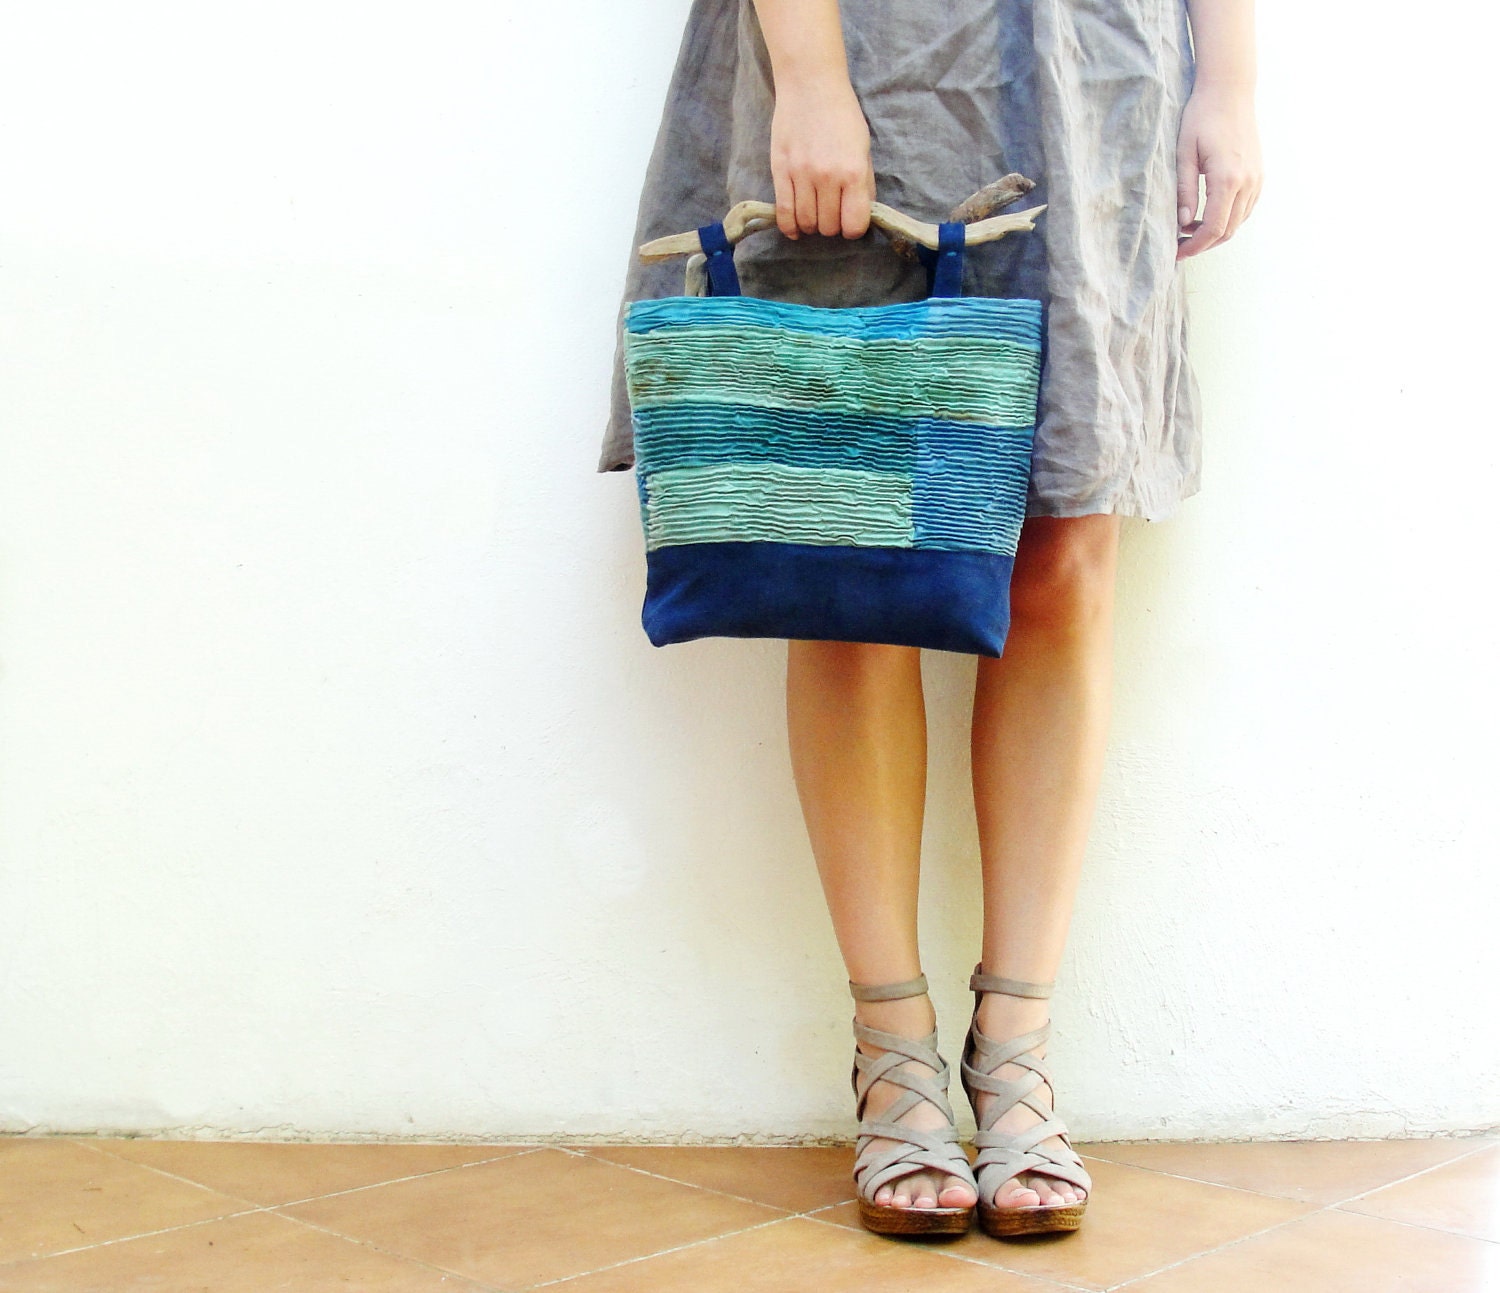 Ocean Breeze Bag - Smocked Hand Dyed Linen with Driftwood Handles and Leather details - StarBags